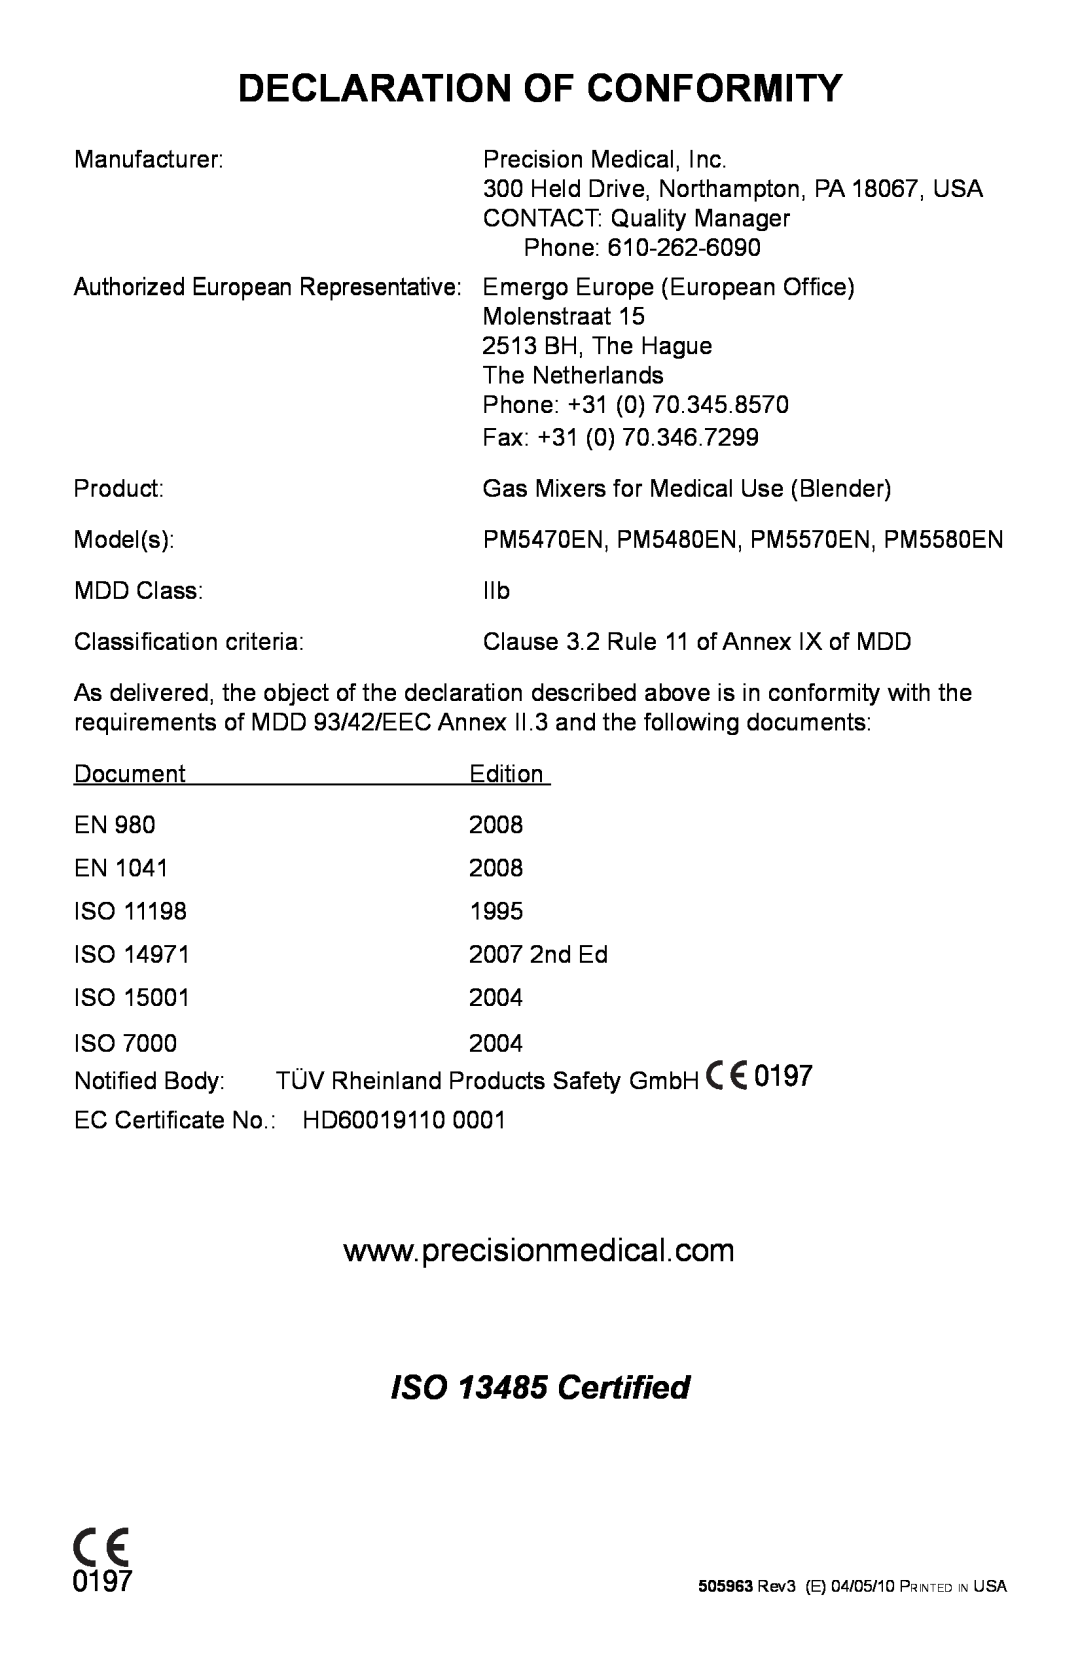 Helio PM5500, PM5400 user manual Declaration Of Conformity, ISO 13485 Certified 